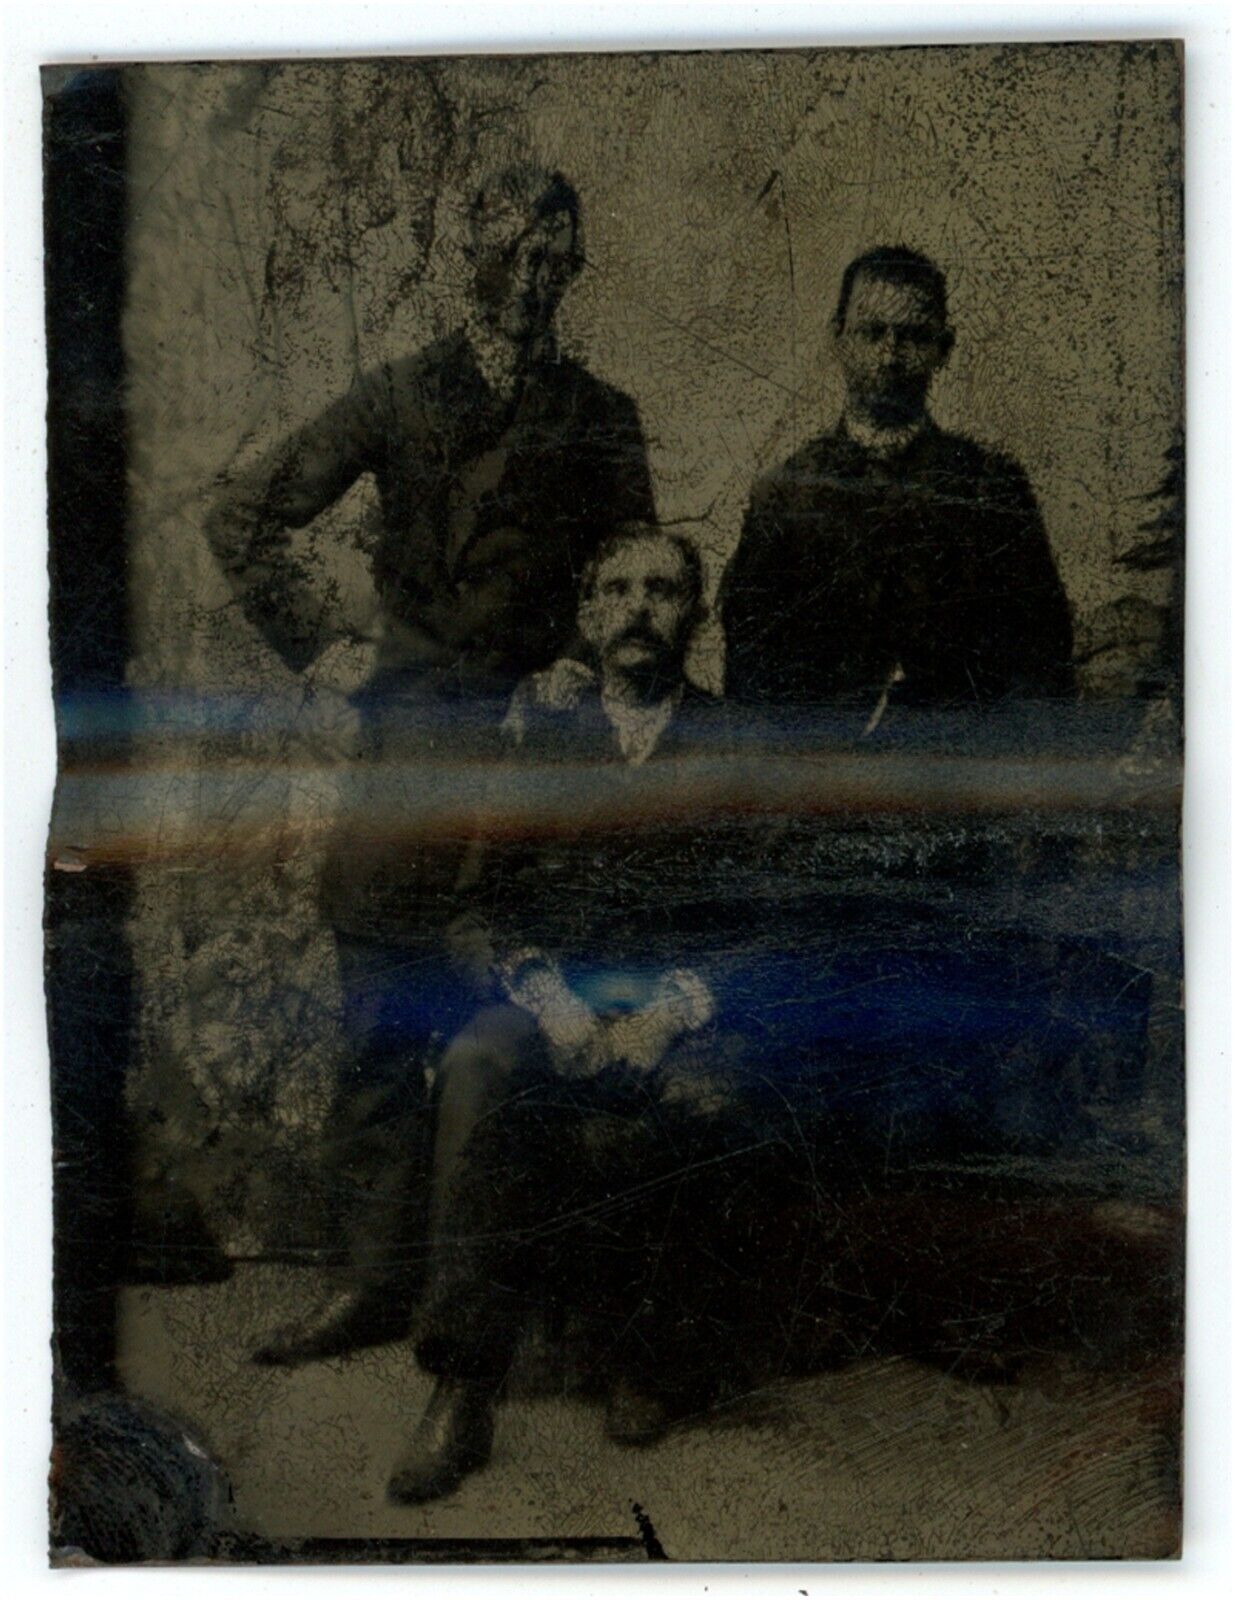 CIRCA 1800'S ANTIQUE 6th Plate TINTYPE Three Men One With Mustache Sitting